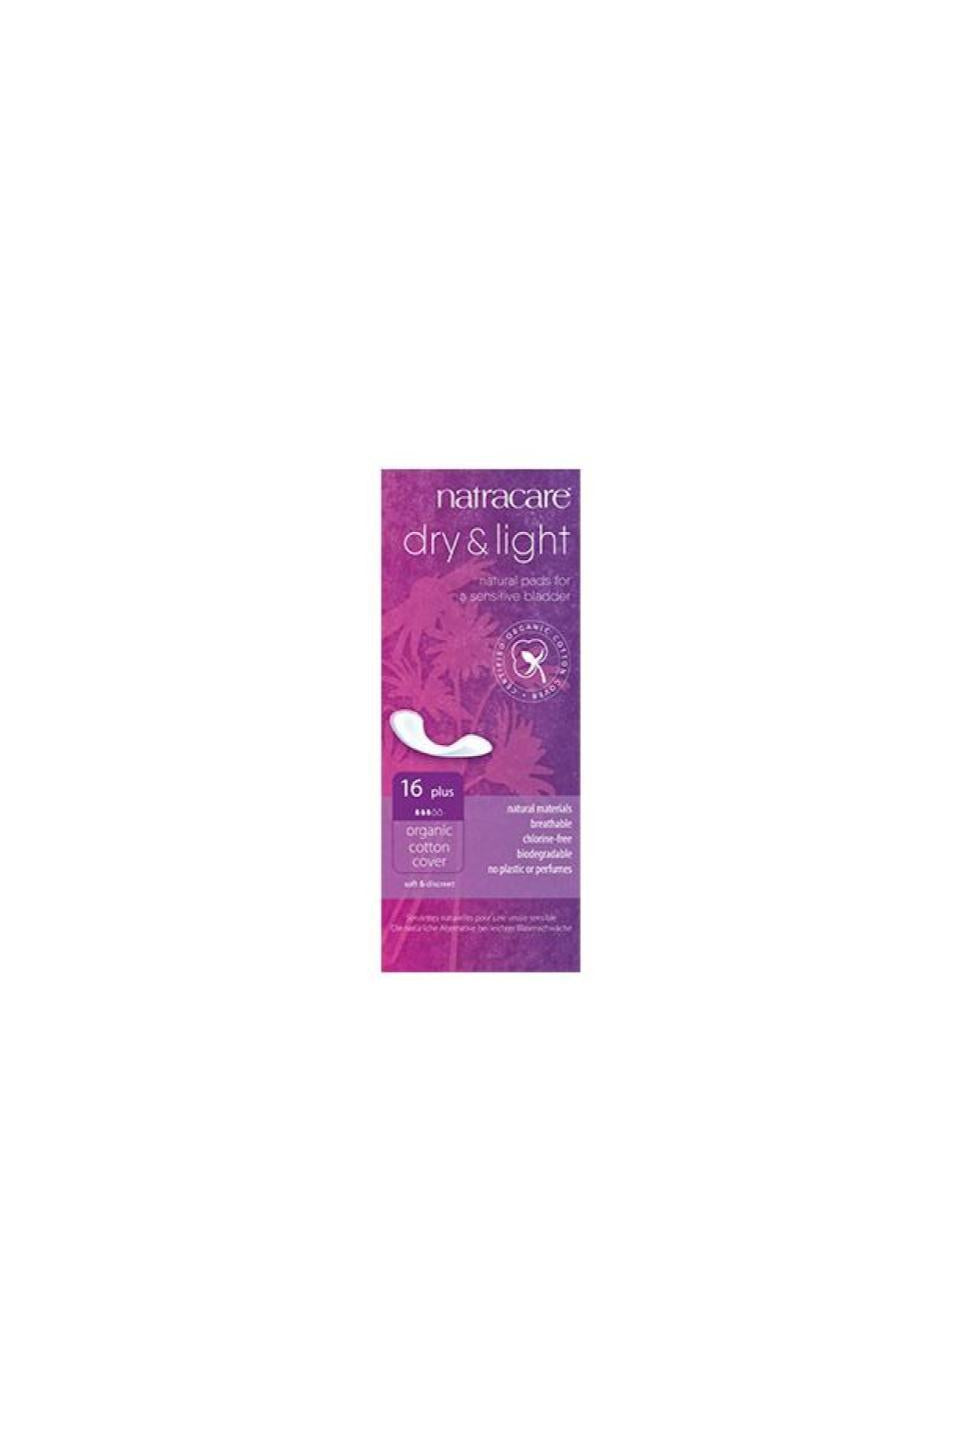 NatraCare Dry + Light Plus Incontinence Pads 16ct